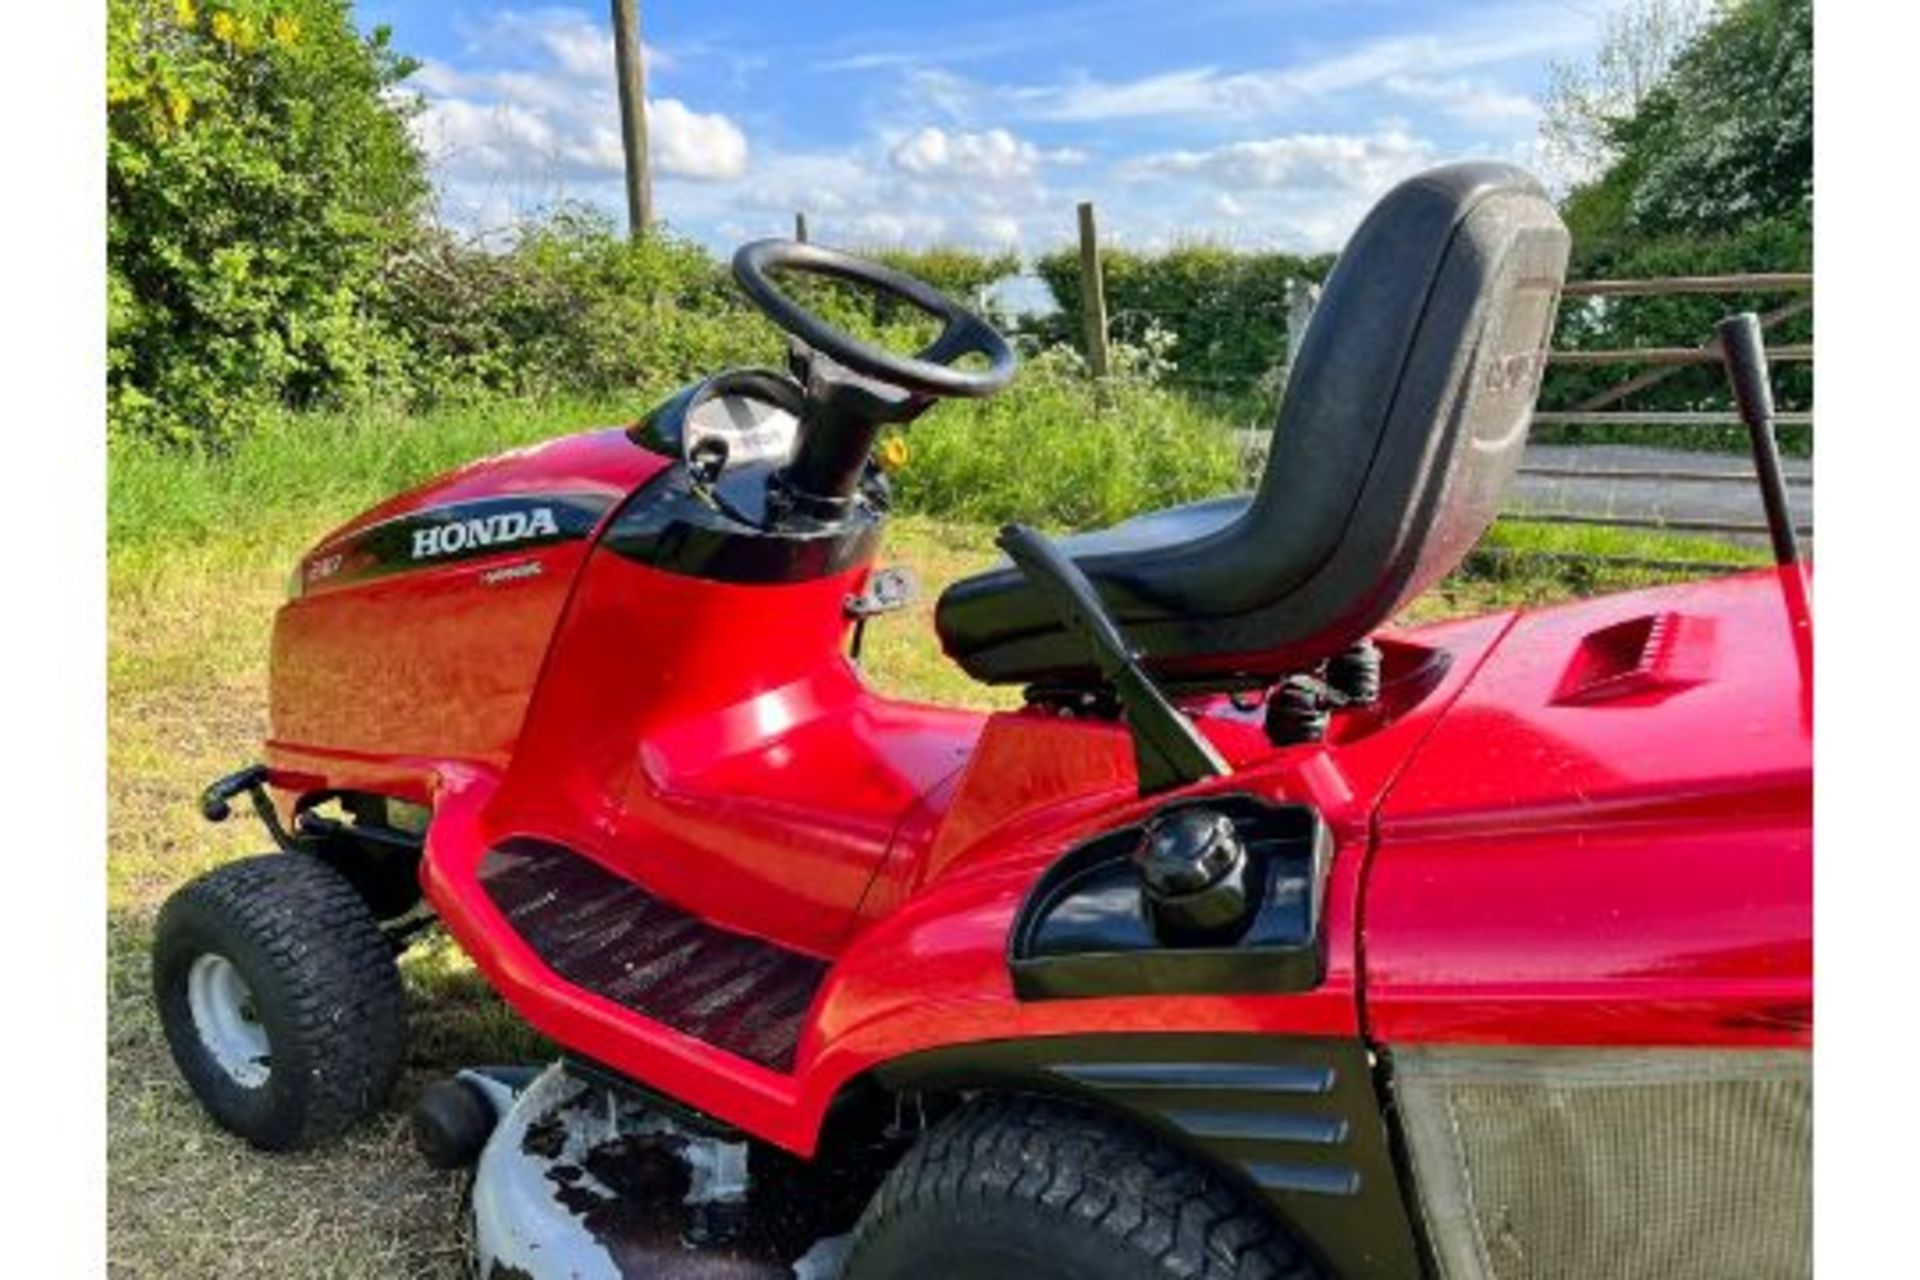 Honda 2417 Ride On Mower With Rear Collector, Runs Drives Cuts And Collects "PLUS VAT" - Image 22 of 22